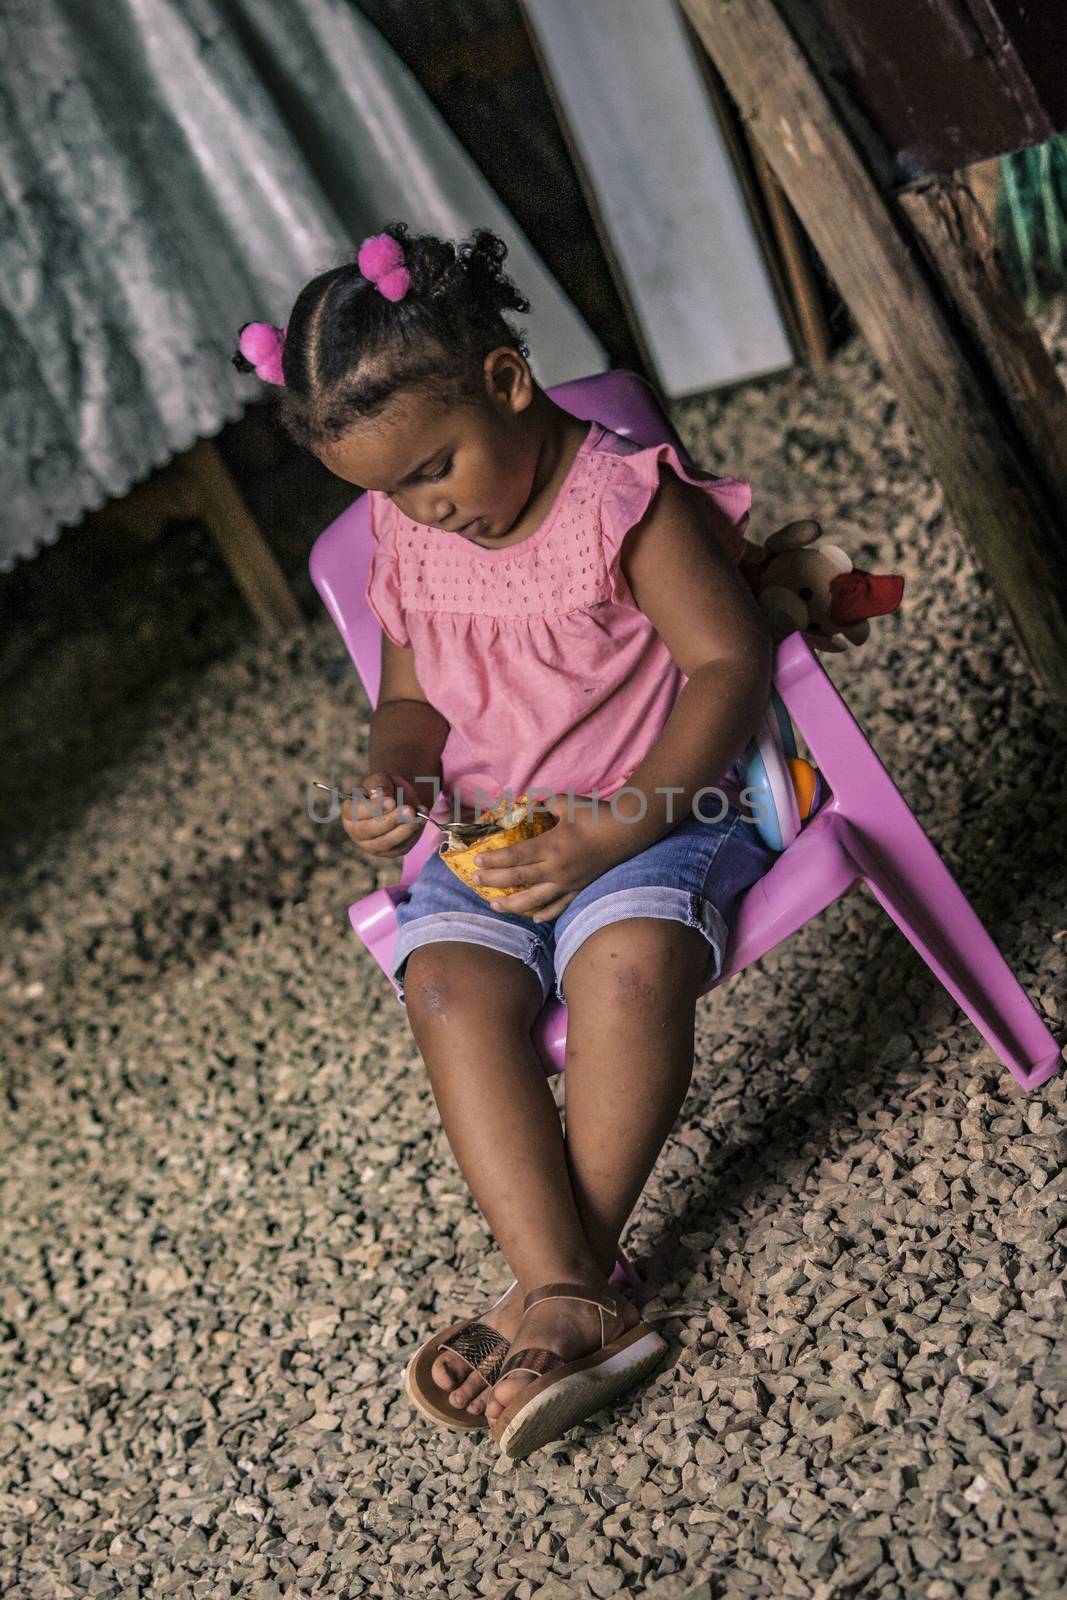 MONTANA REDONDA, DOMINICAN REPUBLIC 27 DECEMBER 2019: Dominican Child Sitted in a poor house